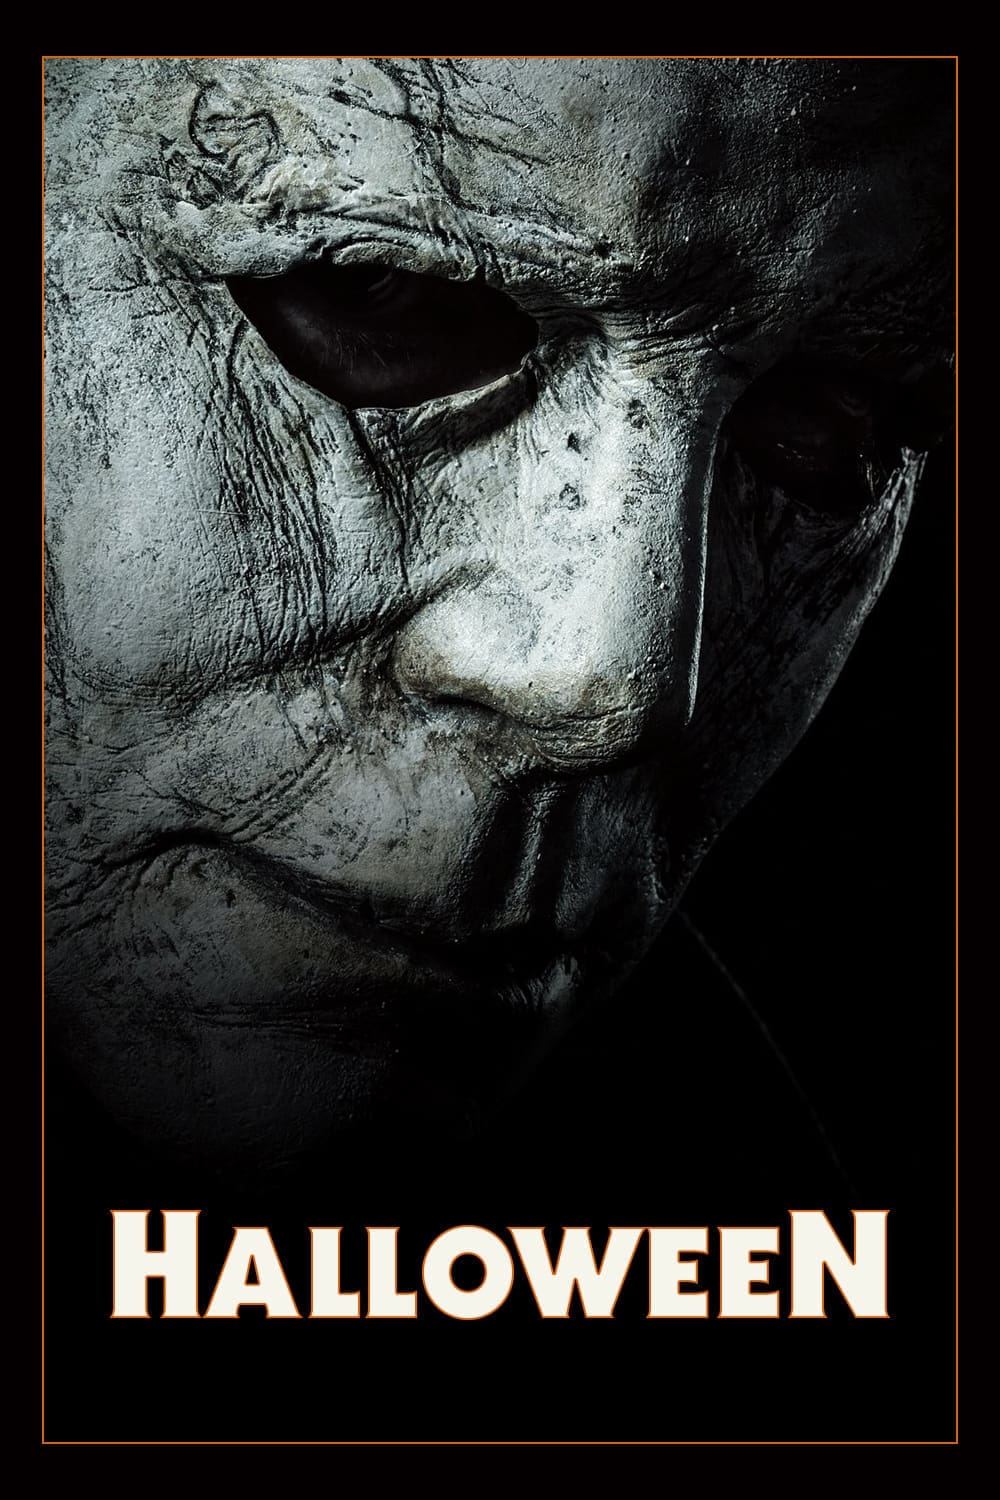 Poster for the movie "Halloween"